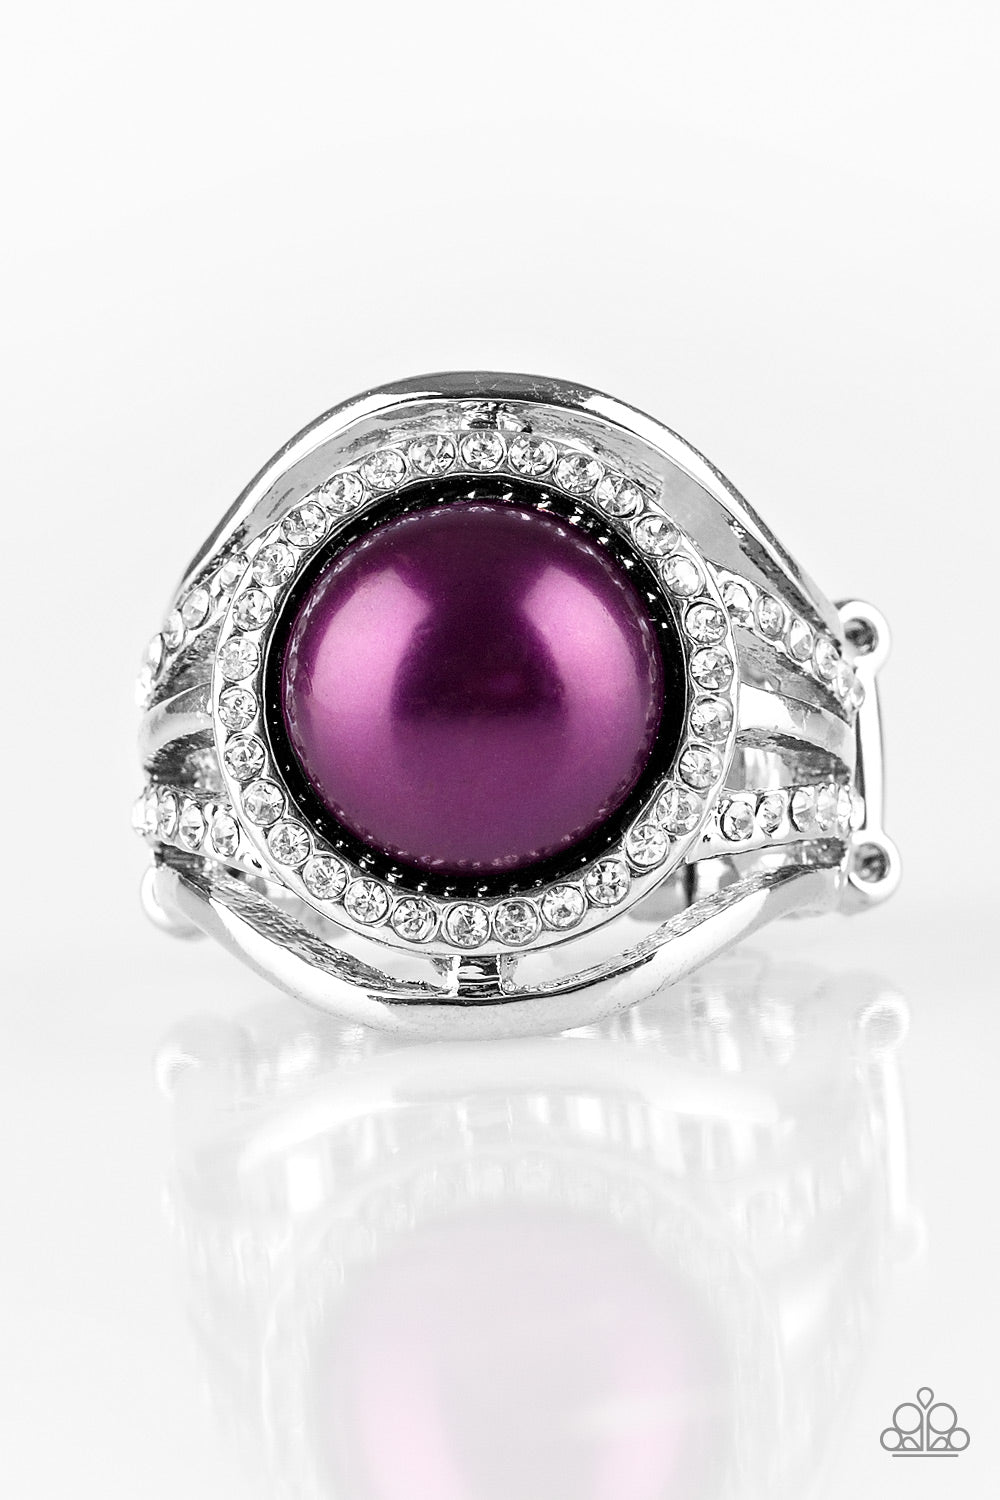 PAMPERED IN PEARLS - PURPLE PEARL RING